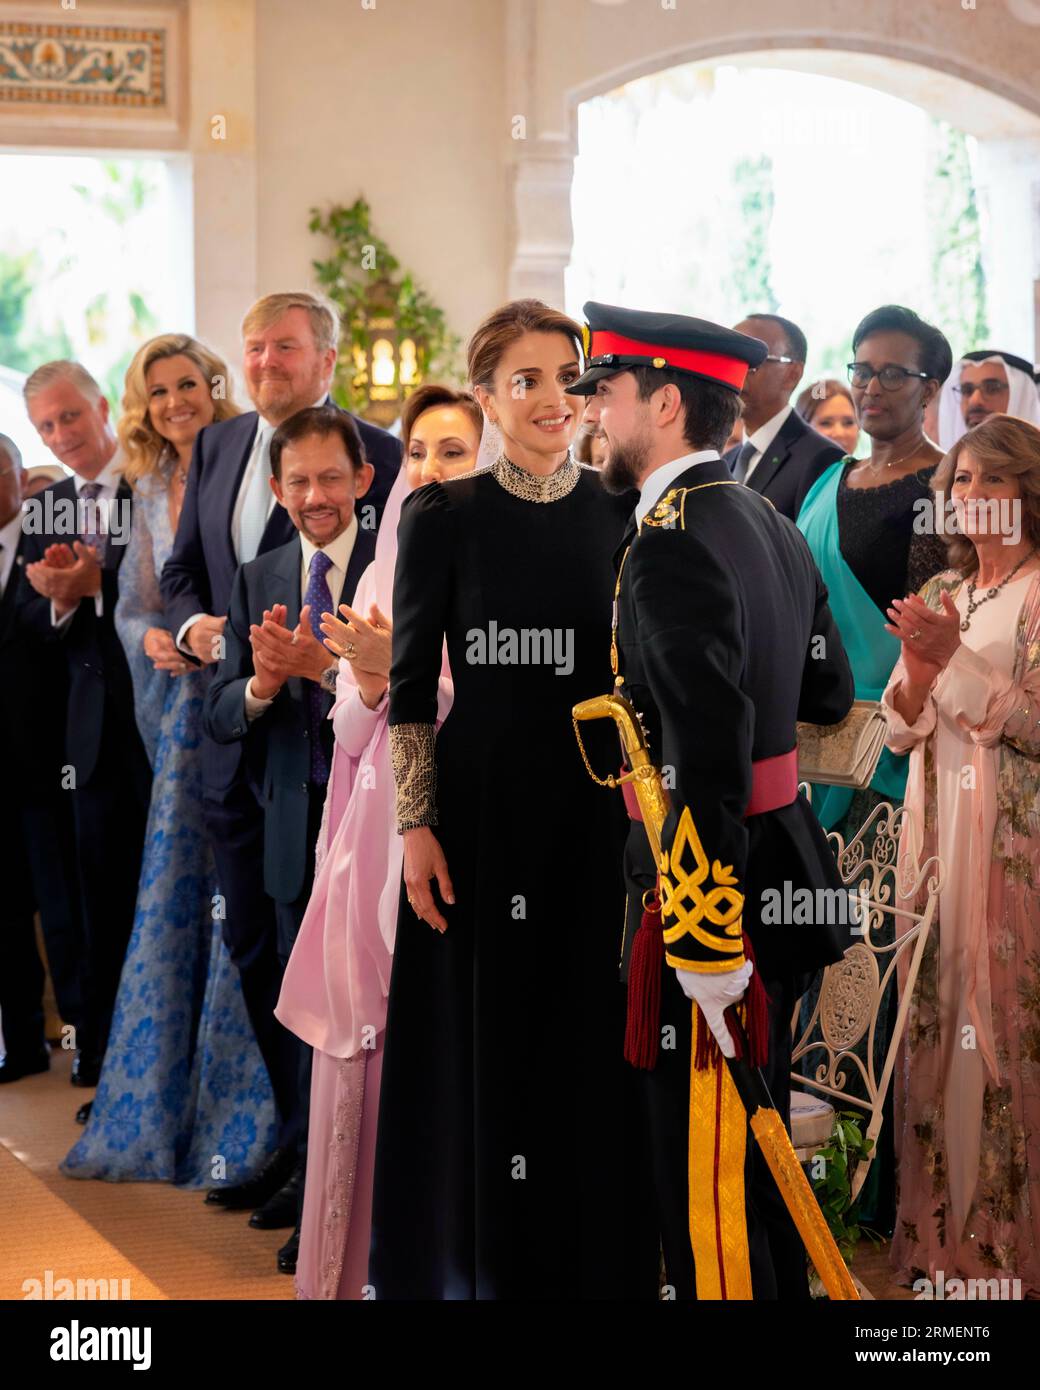 Queen Rania attends the wedding ceremony of His Royal Highness Crown Prince Al Hussein and Her Royal Highness Princess Rajwa Al Hussein, on June 01, 2023, pictures on the occasion of Queen Rania Al Abdullah celebrating her birthday on Thursday, August 31, 2023 Photo: Royal Hashemite Court / Albert Nieboer / Netherlands OUT / Point De Vue OUT Stock Photo